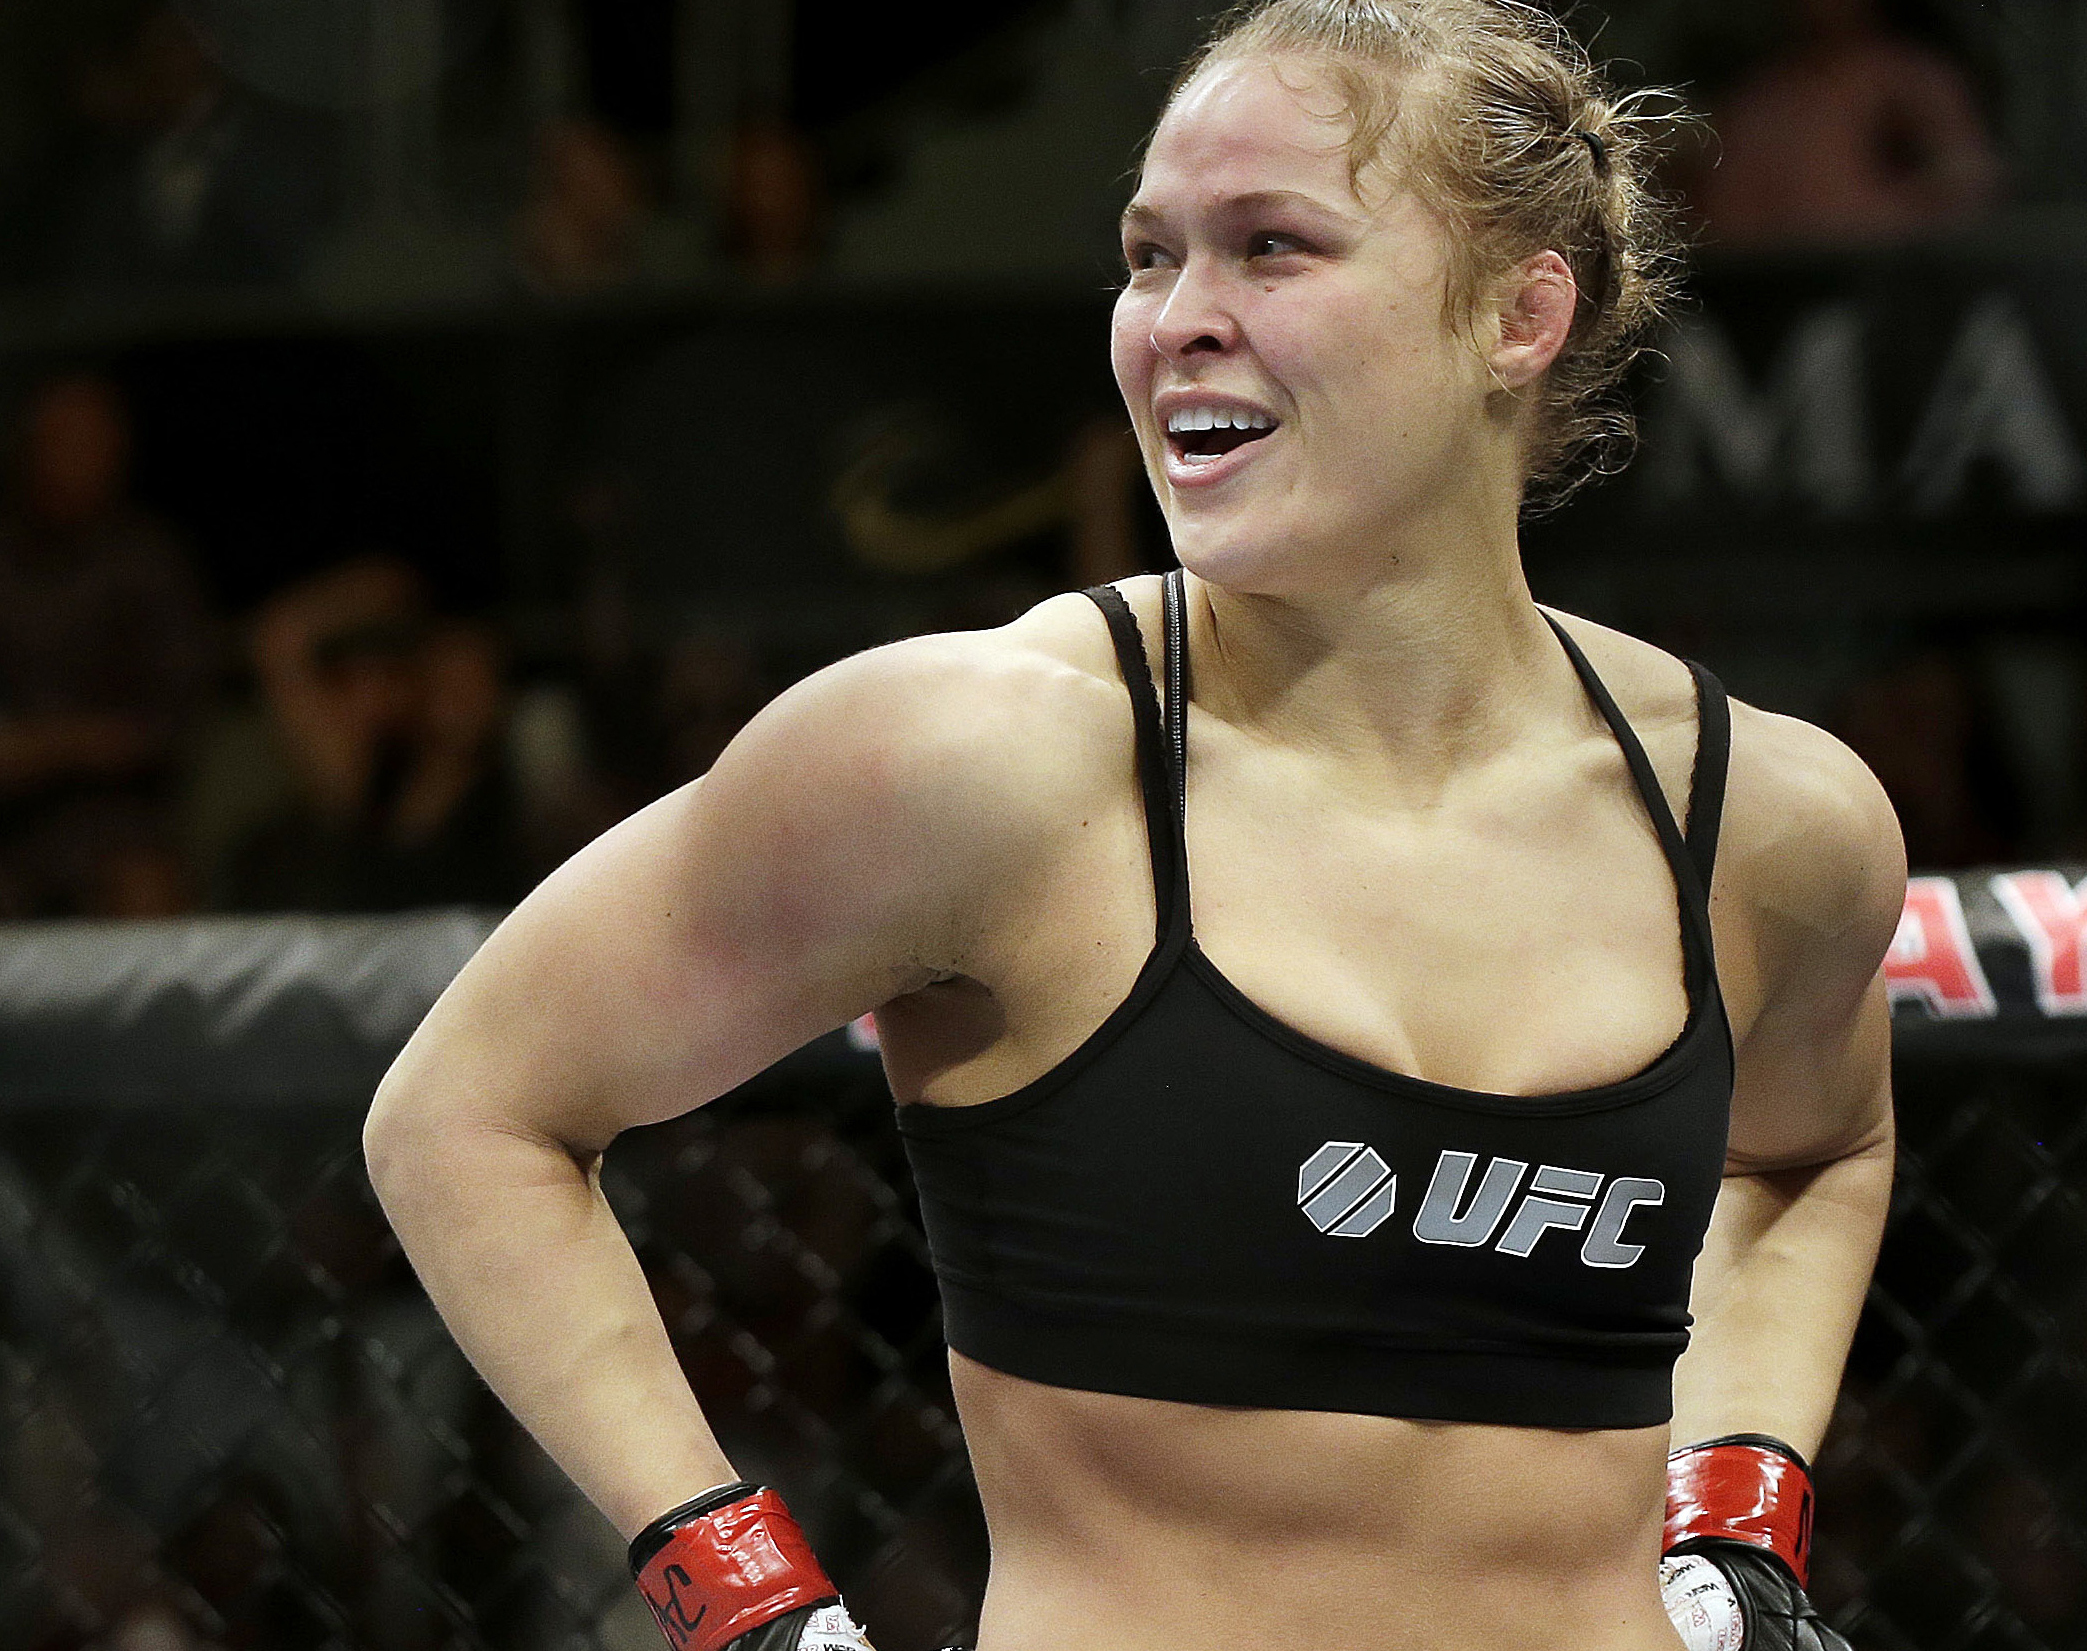 Cris Cyborg, Ronda Rousey and the 10 Best Fighters in Women's MMA